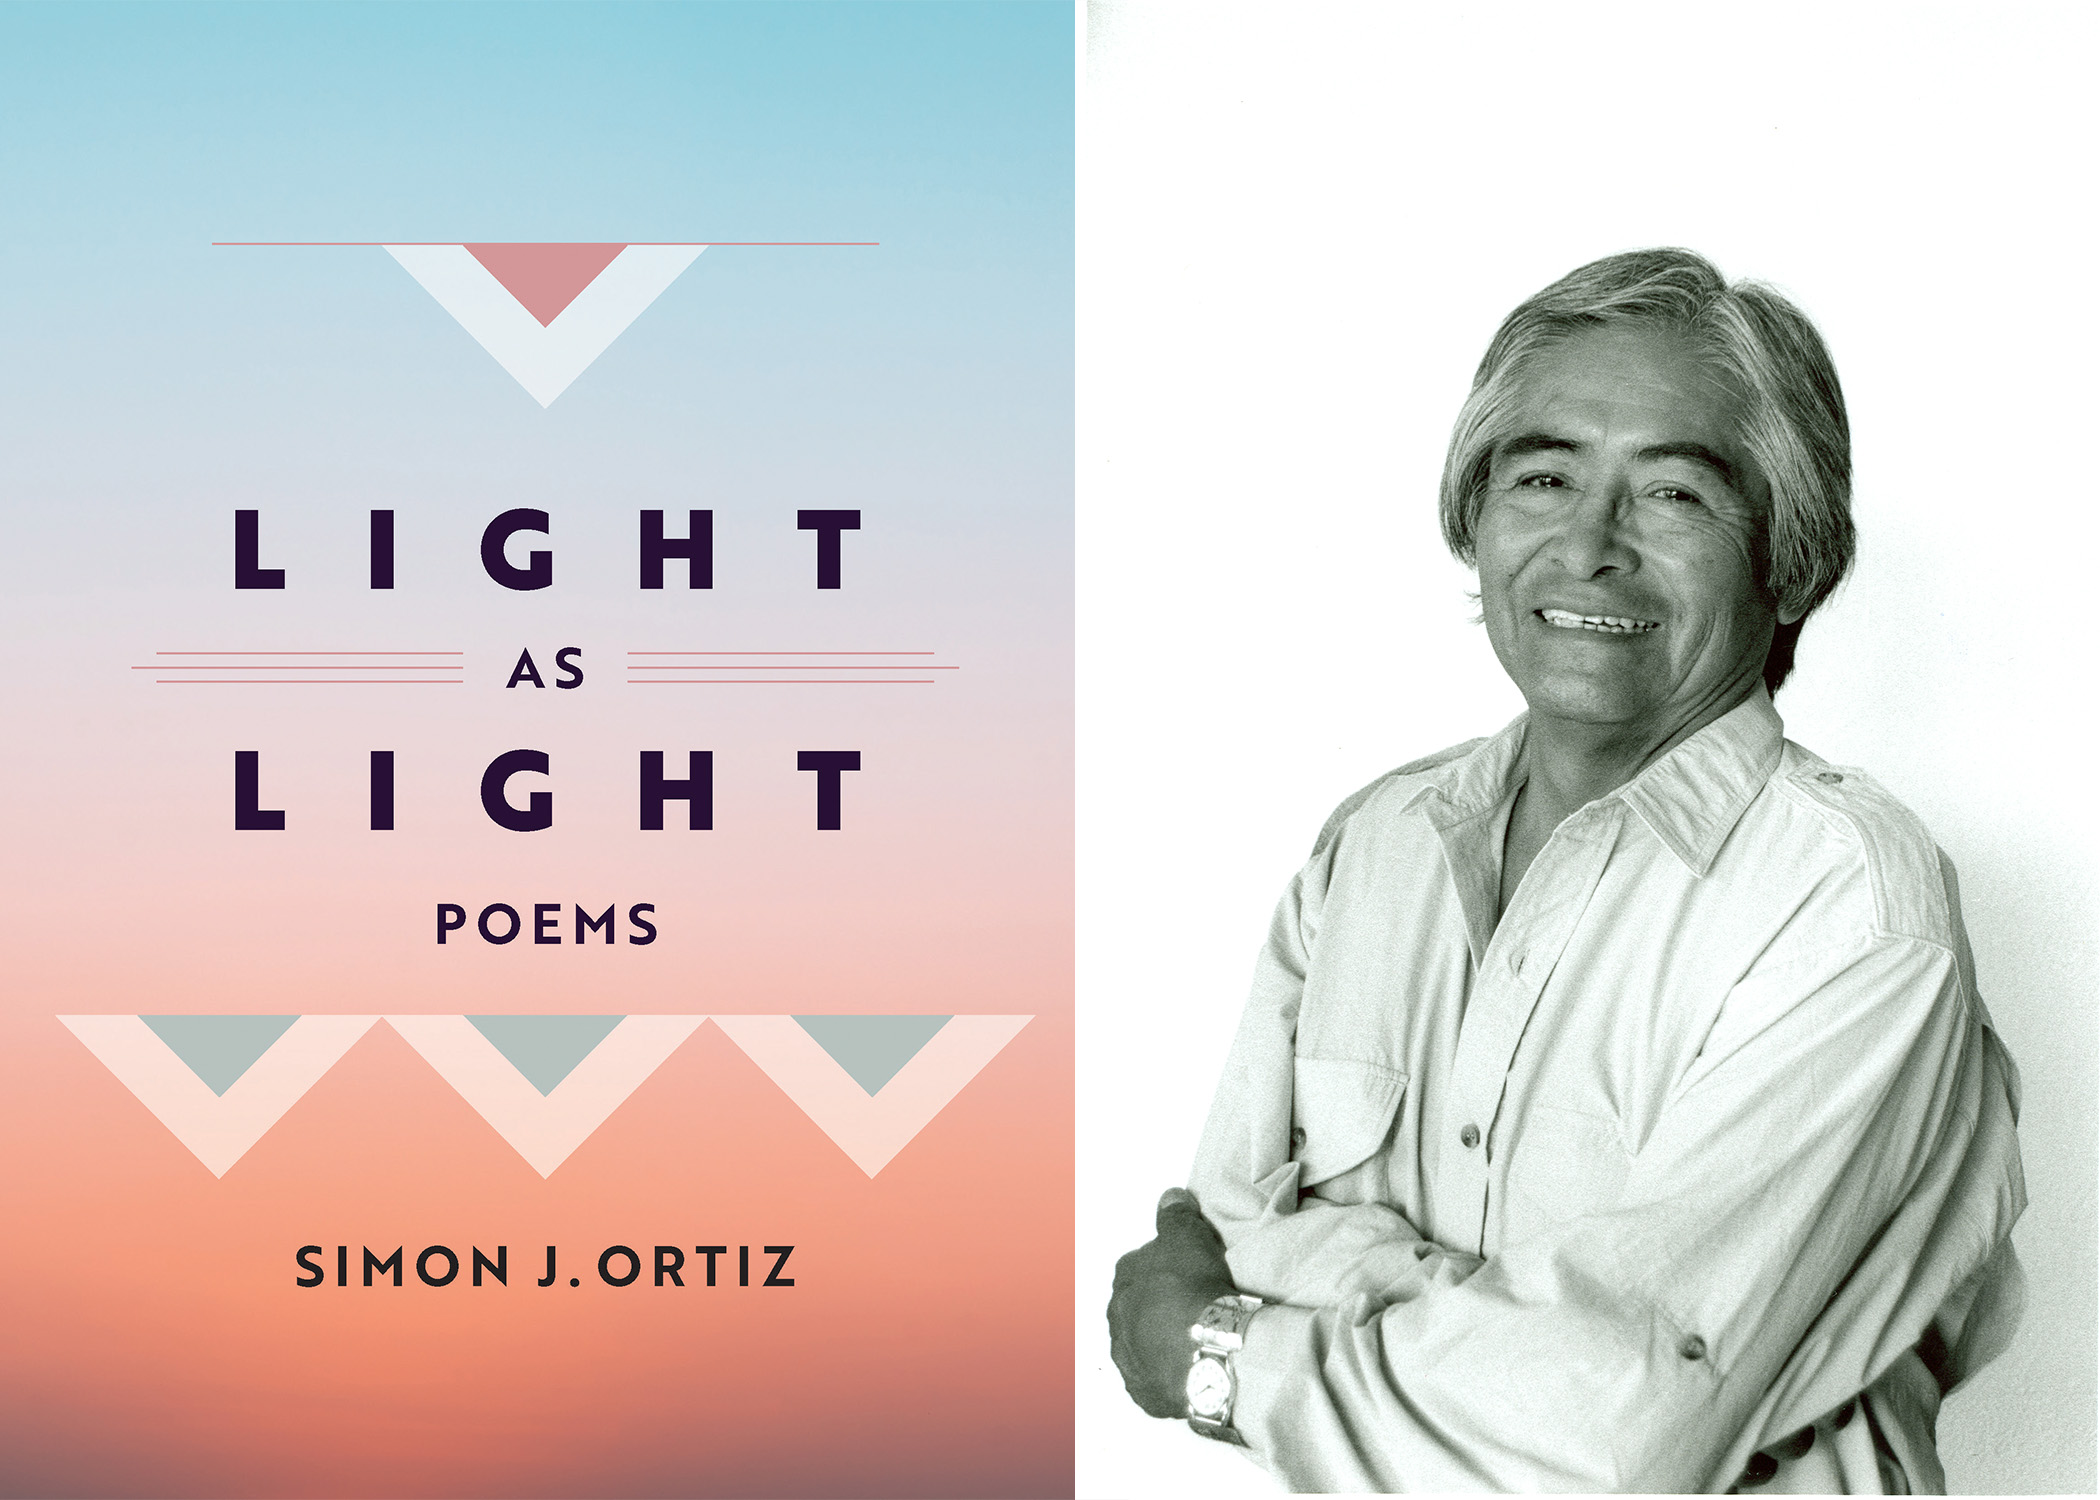 Book cover for "Light as Light, Poems and image of author Simona Ortiz